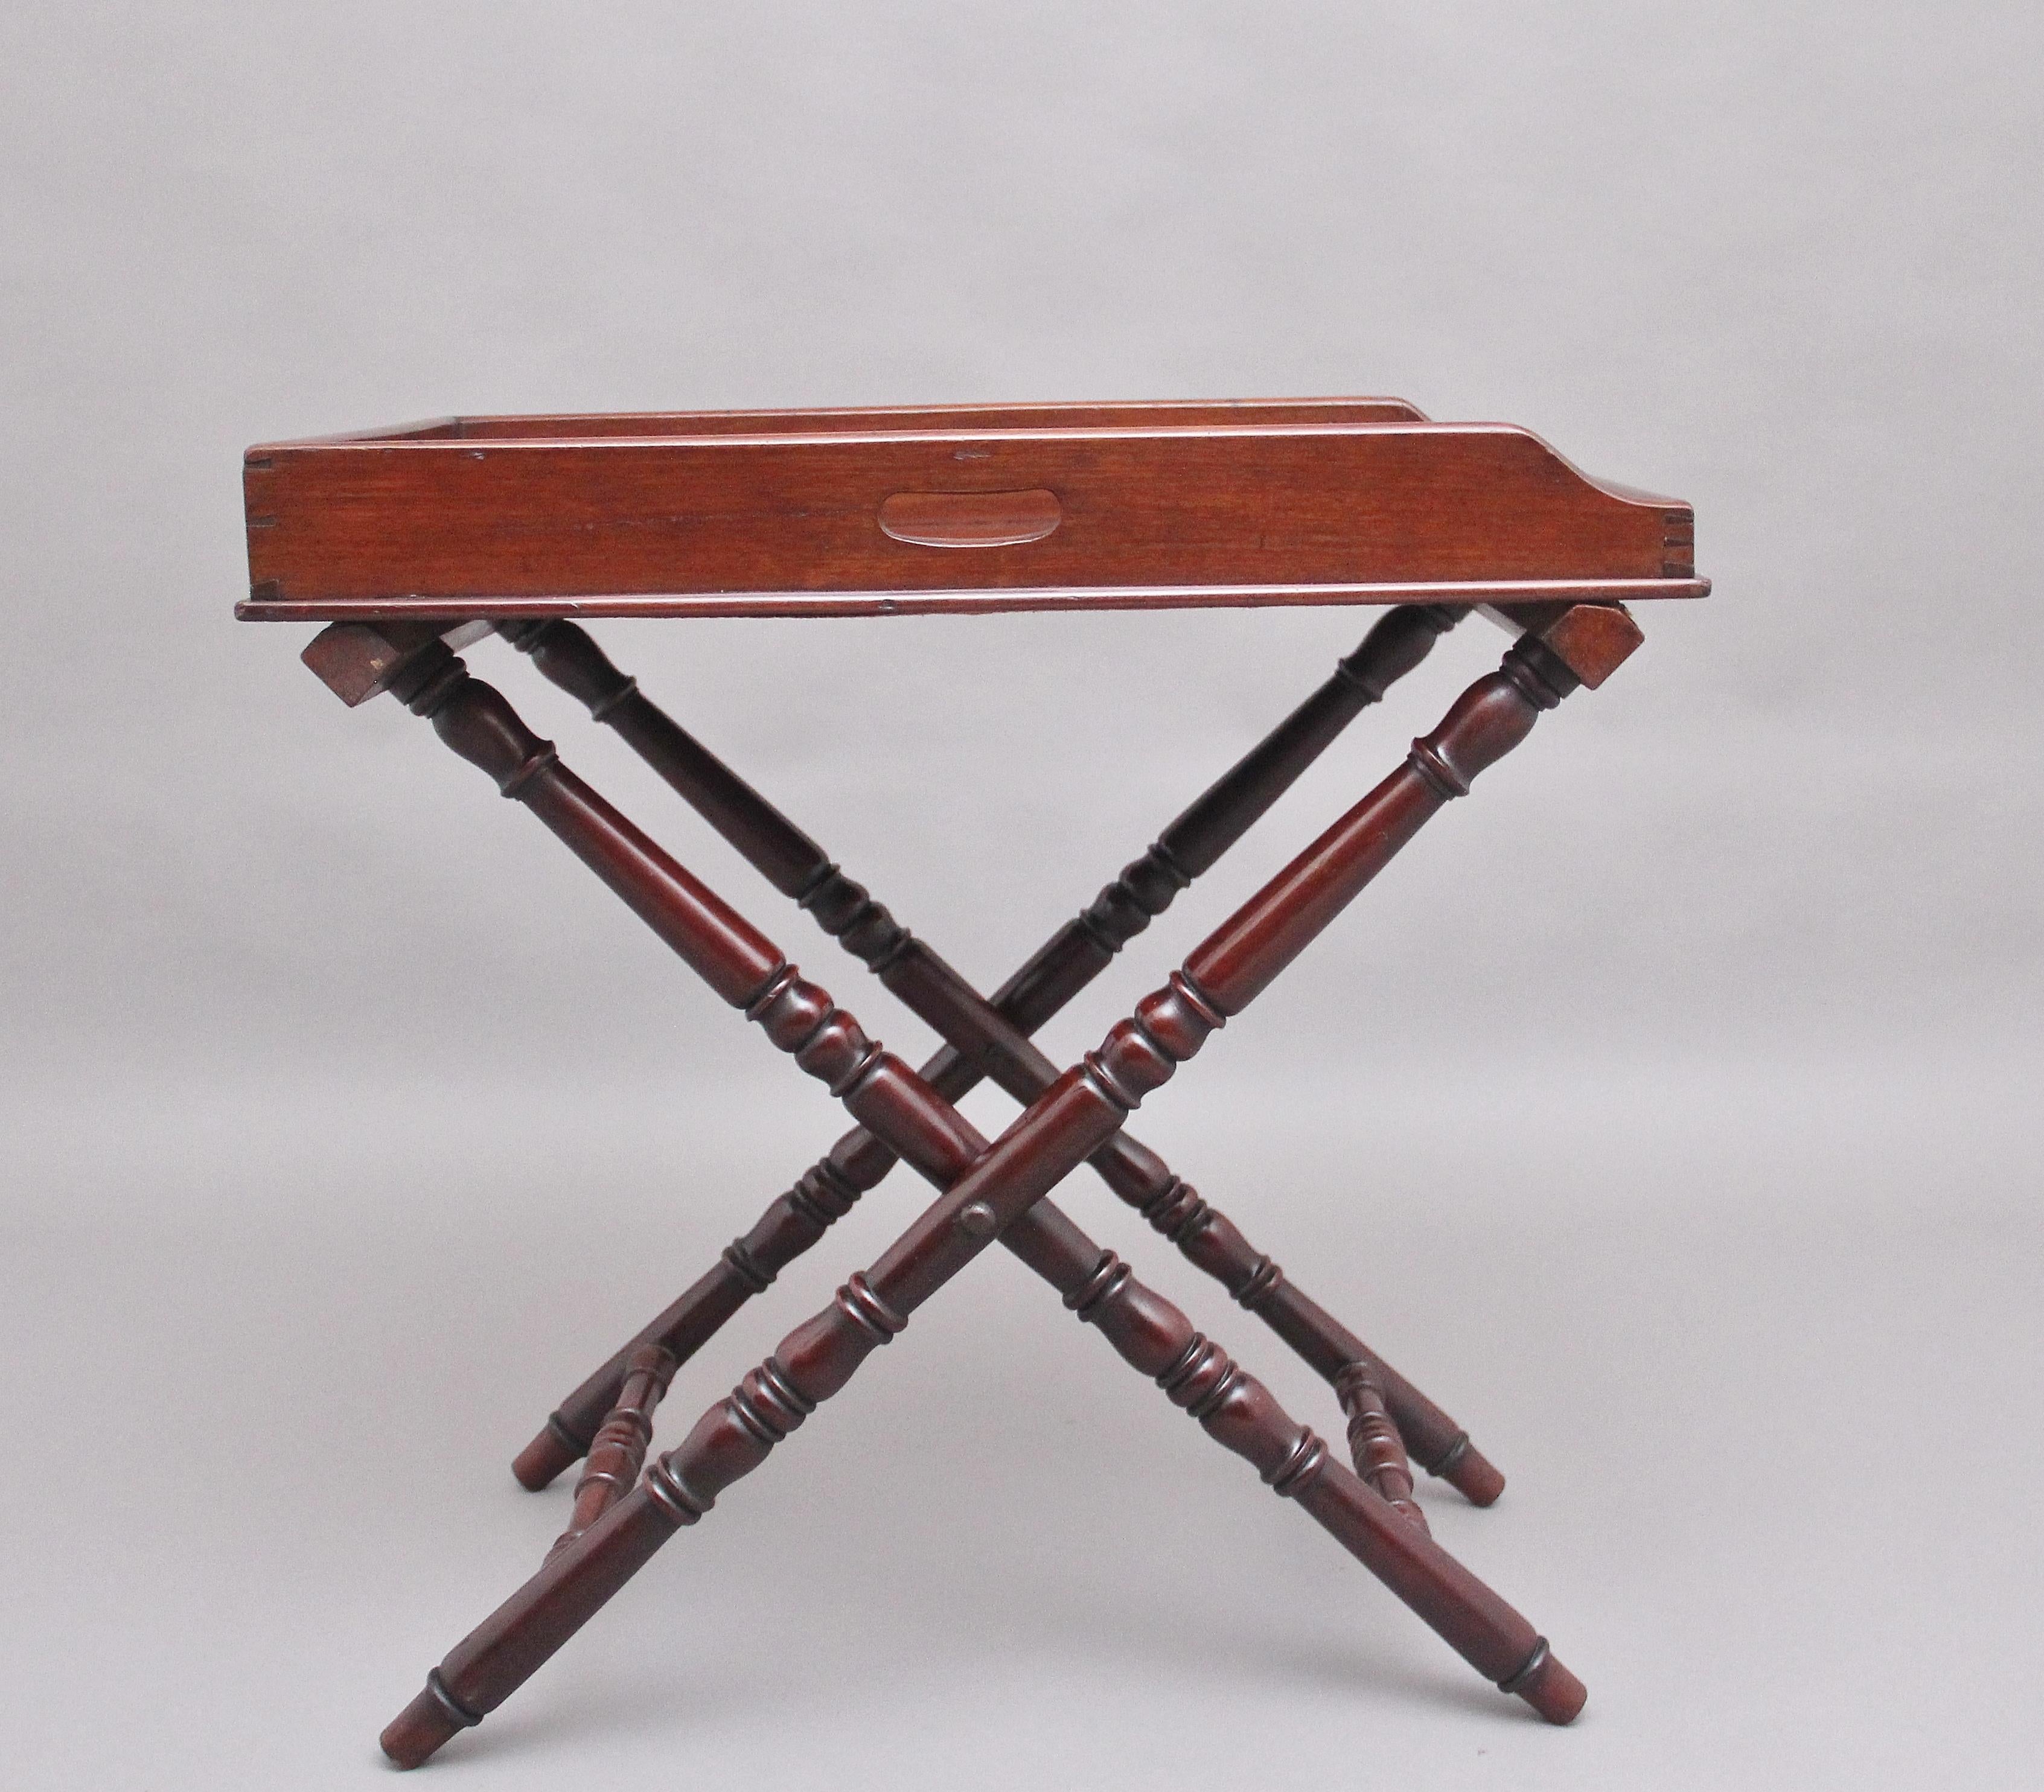 A lovely quality early 19th century mahogany butlers tray on stand, the rectangular shaped tray with a surround gallery three quarters raised and with two fret cut carrying handles above a folding stand. Circa 1830.